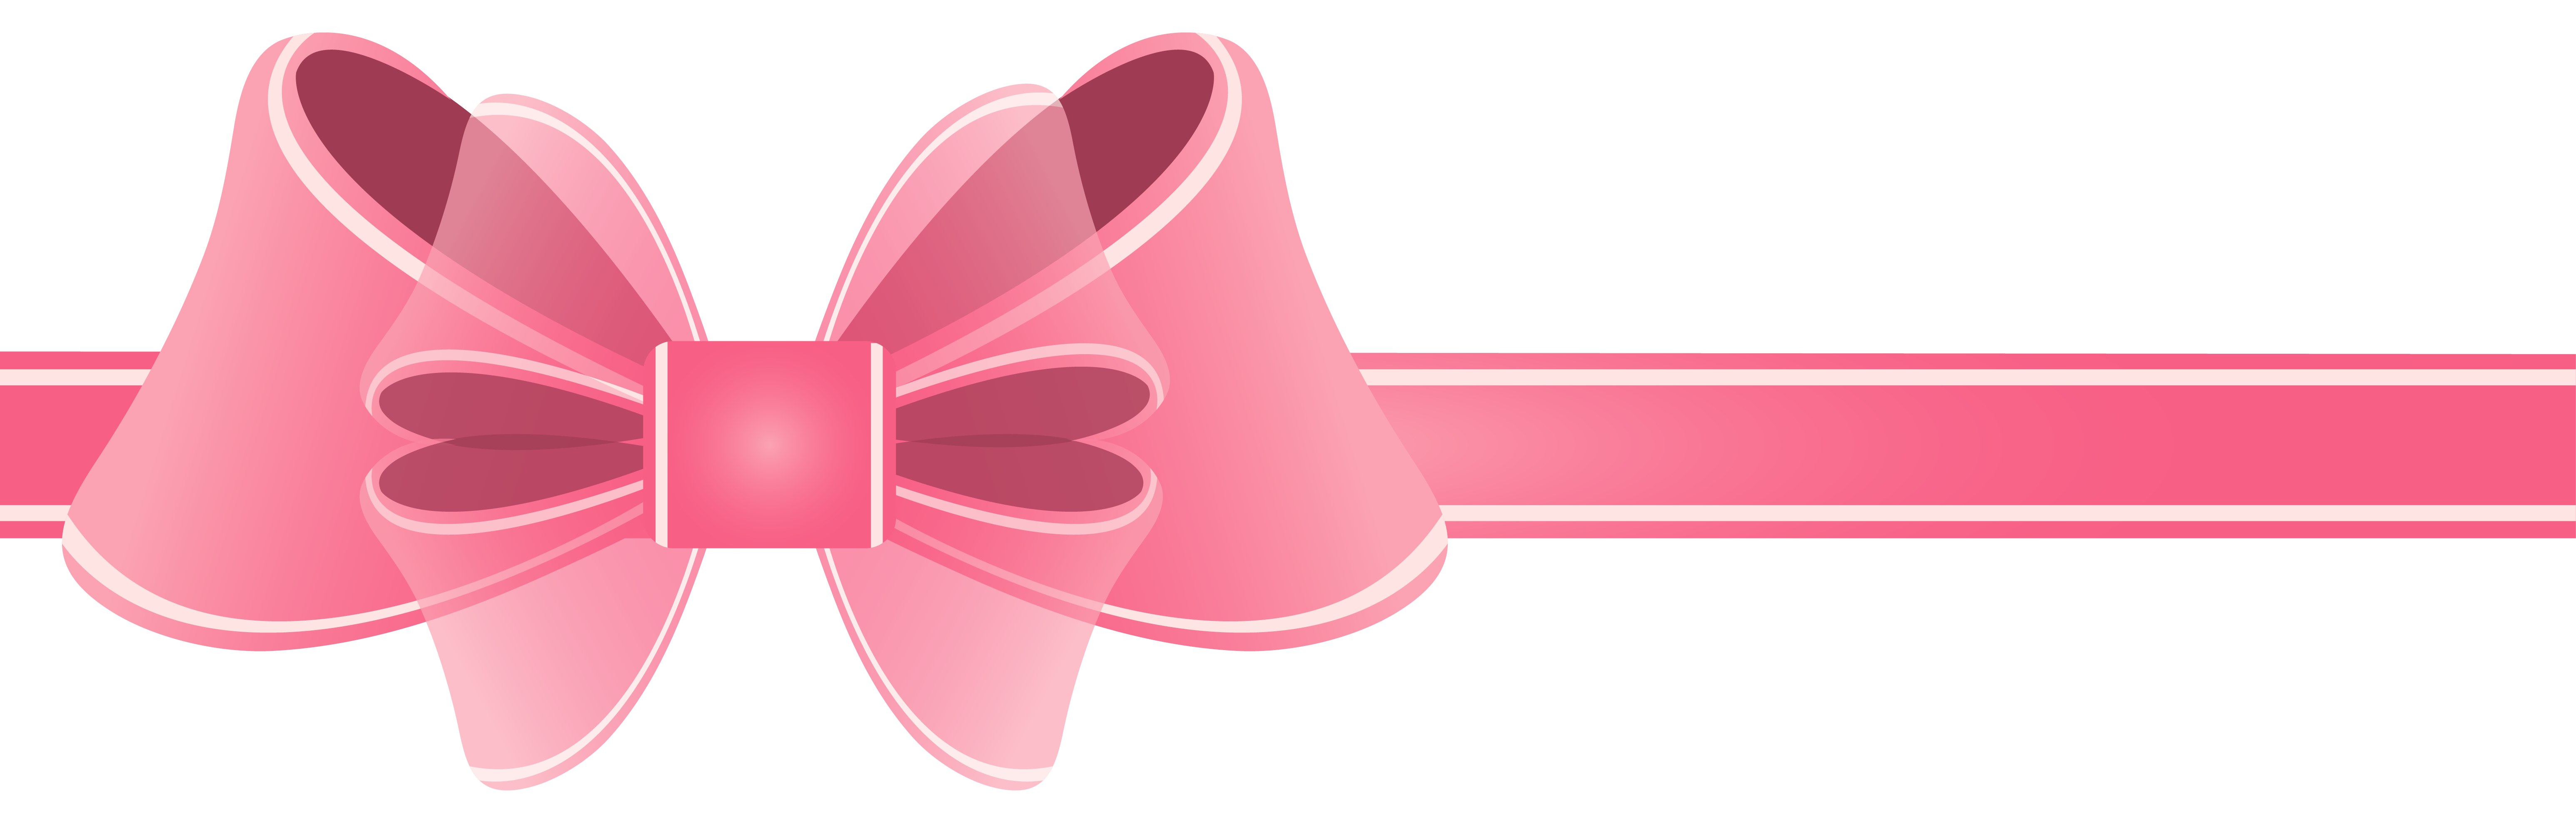 Clipart bow banner. Pink ribbon png picture